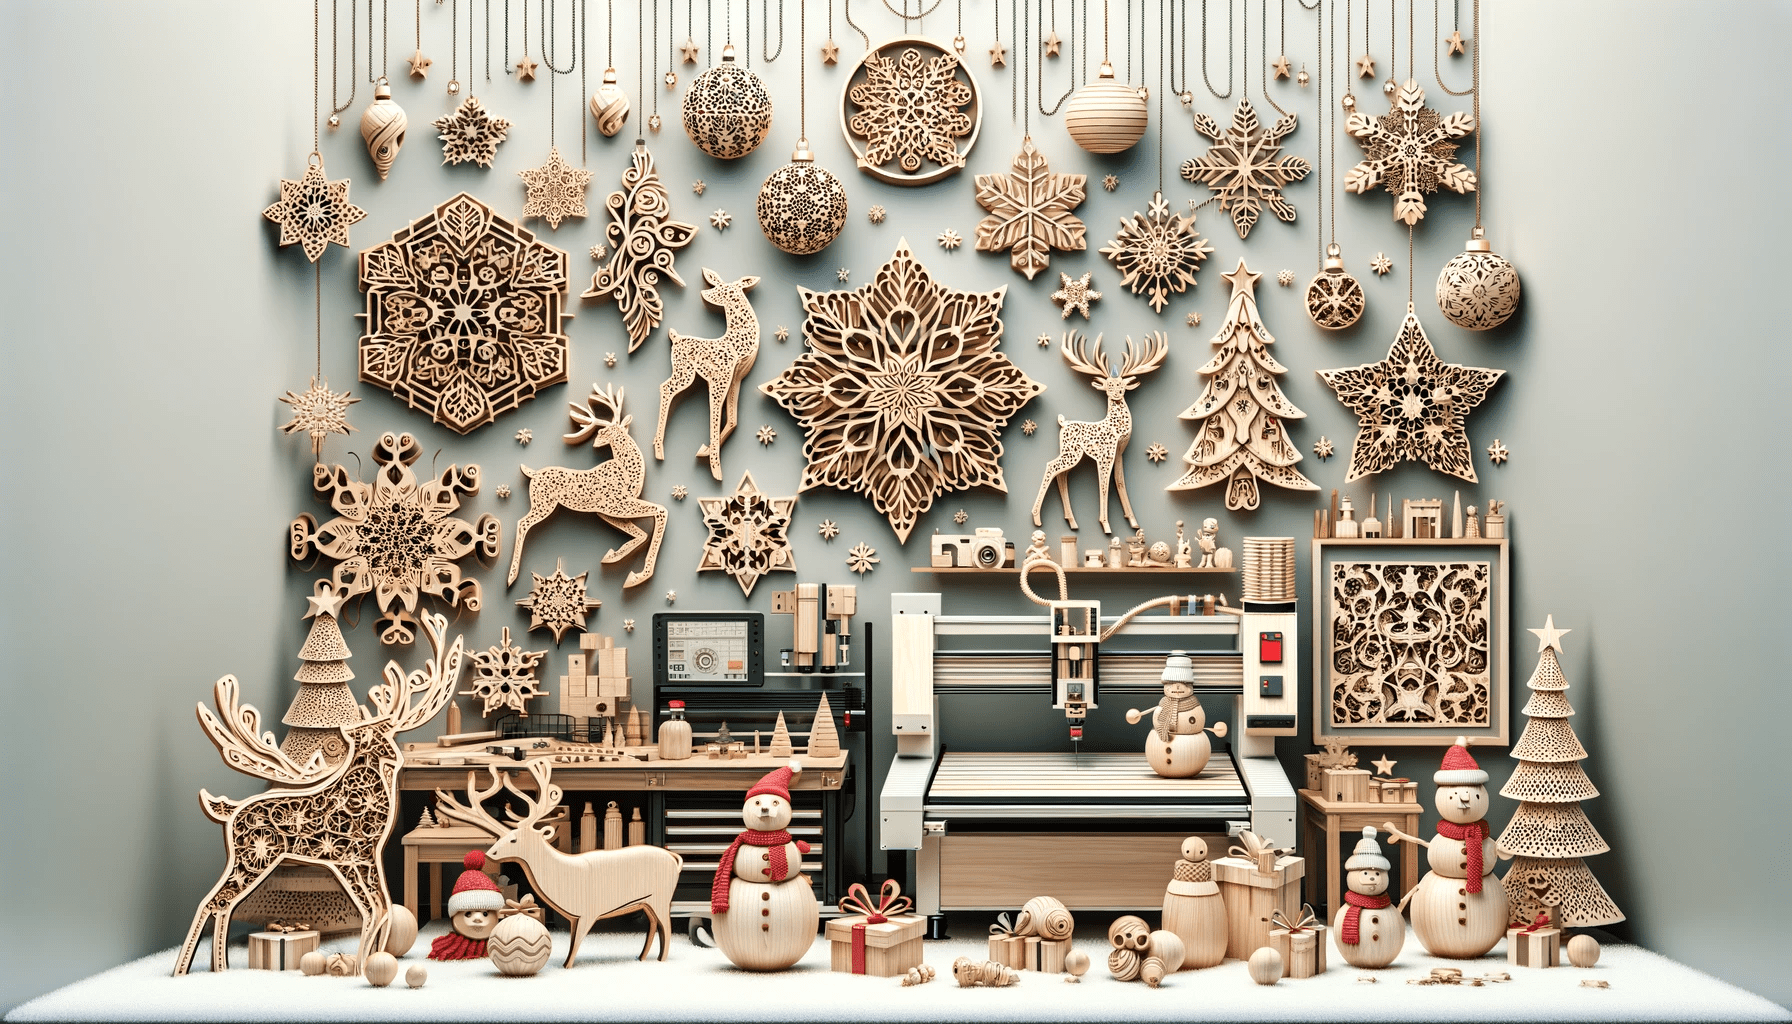 Various CNC projects designed for the winter holidays. The scene should show a collection of intricate an